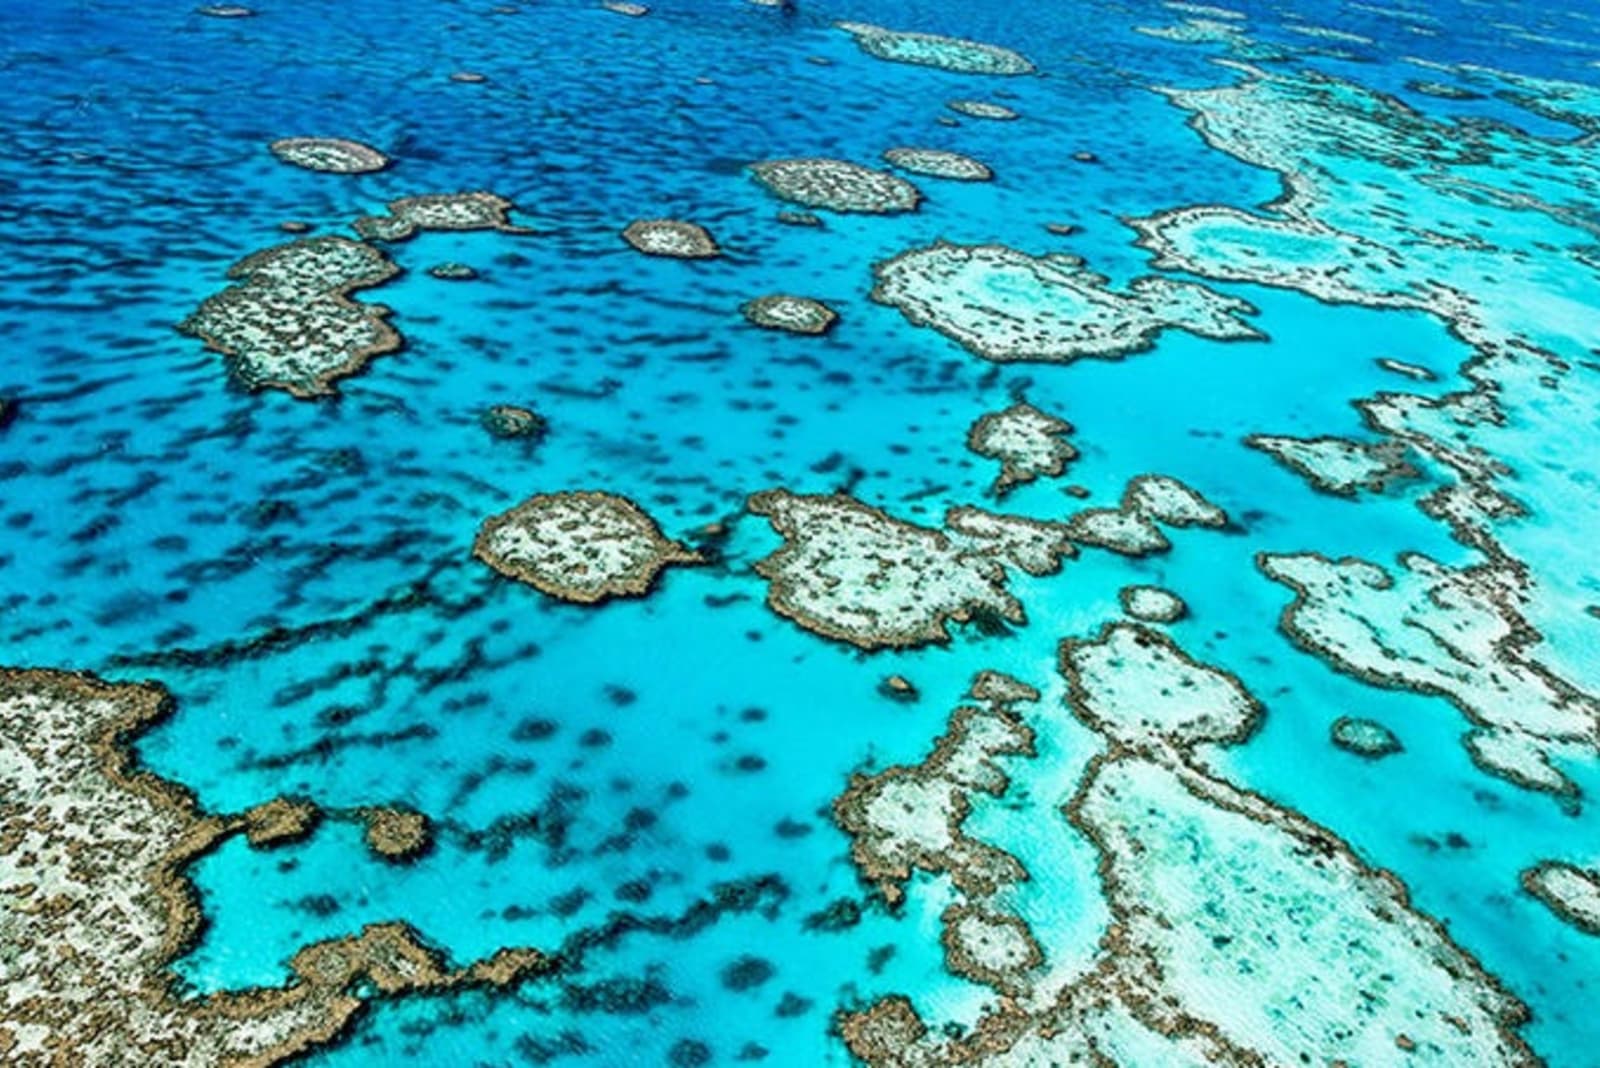 great-barrier-reef-from-above.jpg